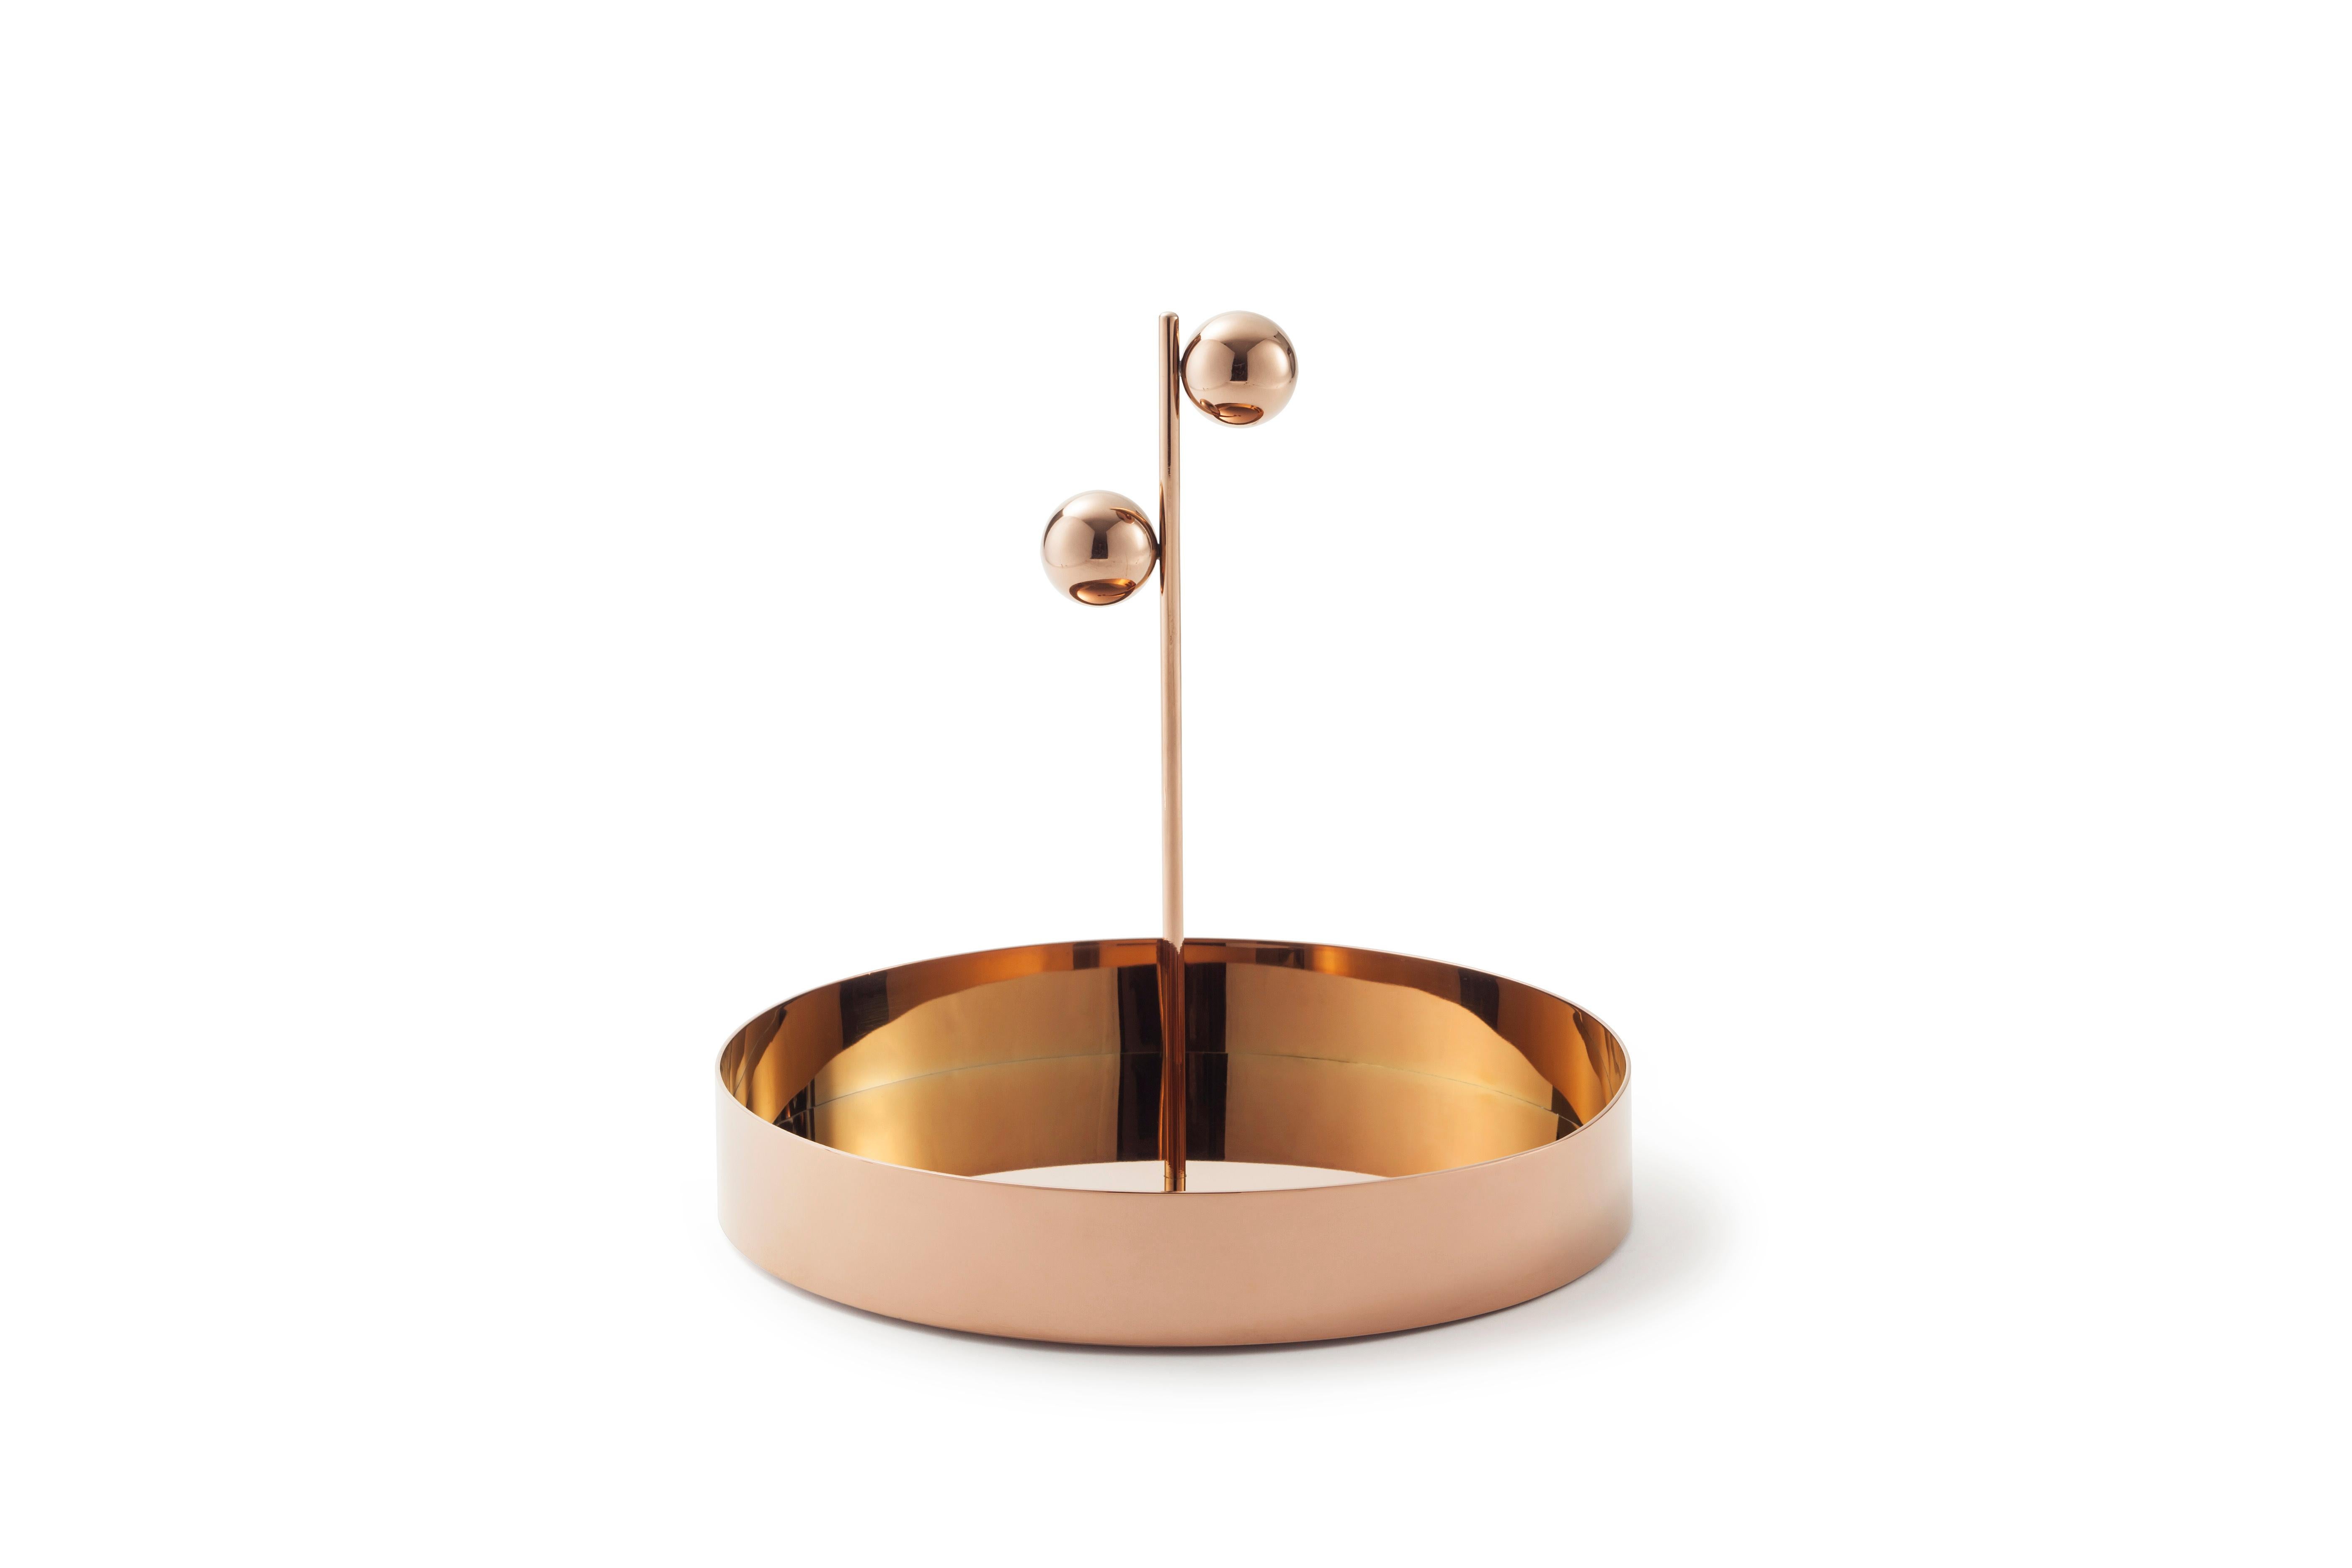 Contemporary tray
Measures: Diameter 25 x height 24 cm
Plated metal coated with glossy copper finish
From Earth, one can only see the portion of the Moon that is illuminated by the Sun. An image that is constantly changing as the Moon orbits the